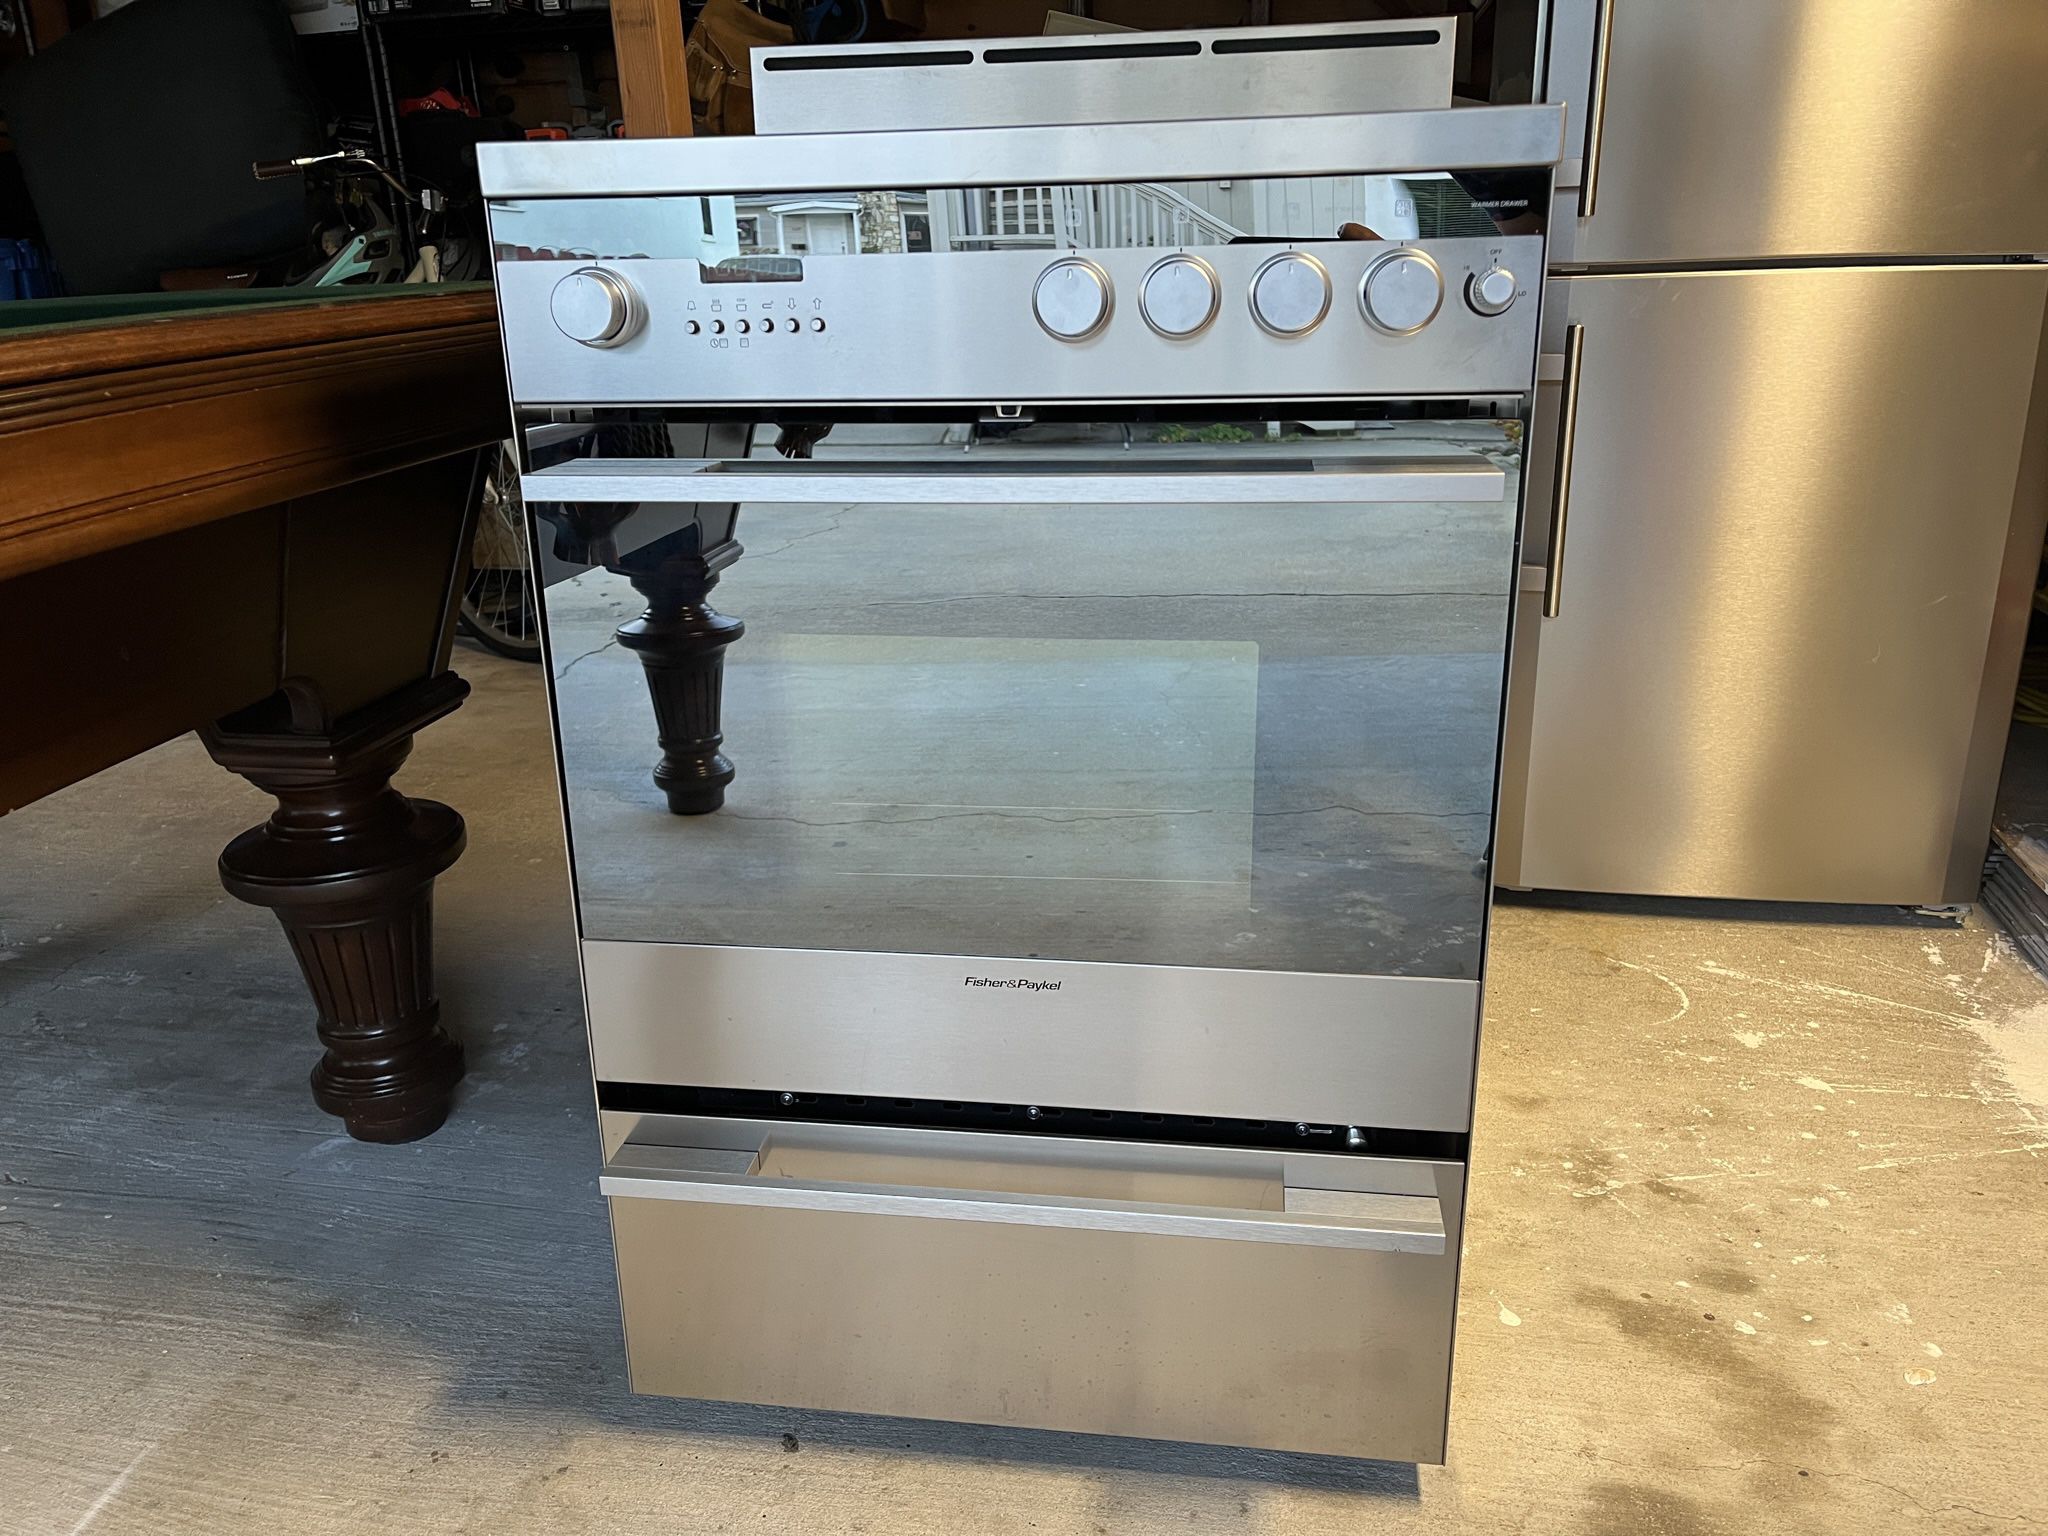 Fisher & Paykel OR24SDPWSX1 Electric Range $1000 OBO